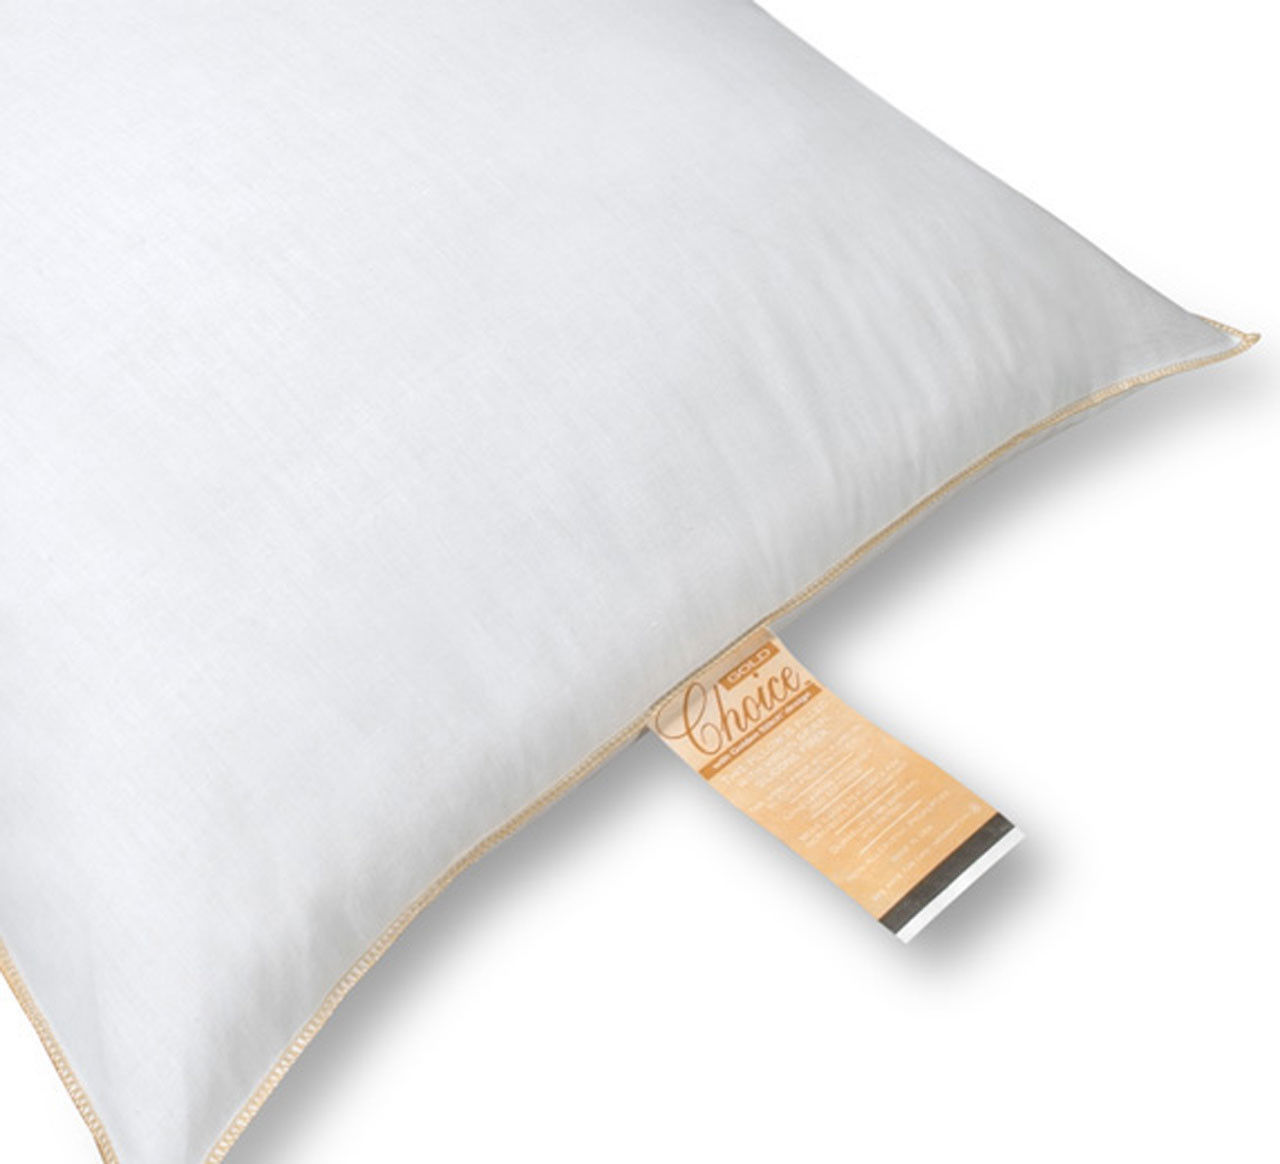 Why are super gold choice pillows ideal for a perfect sleep?